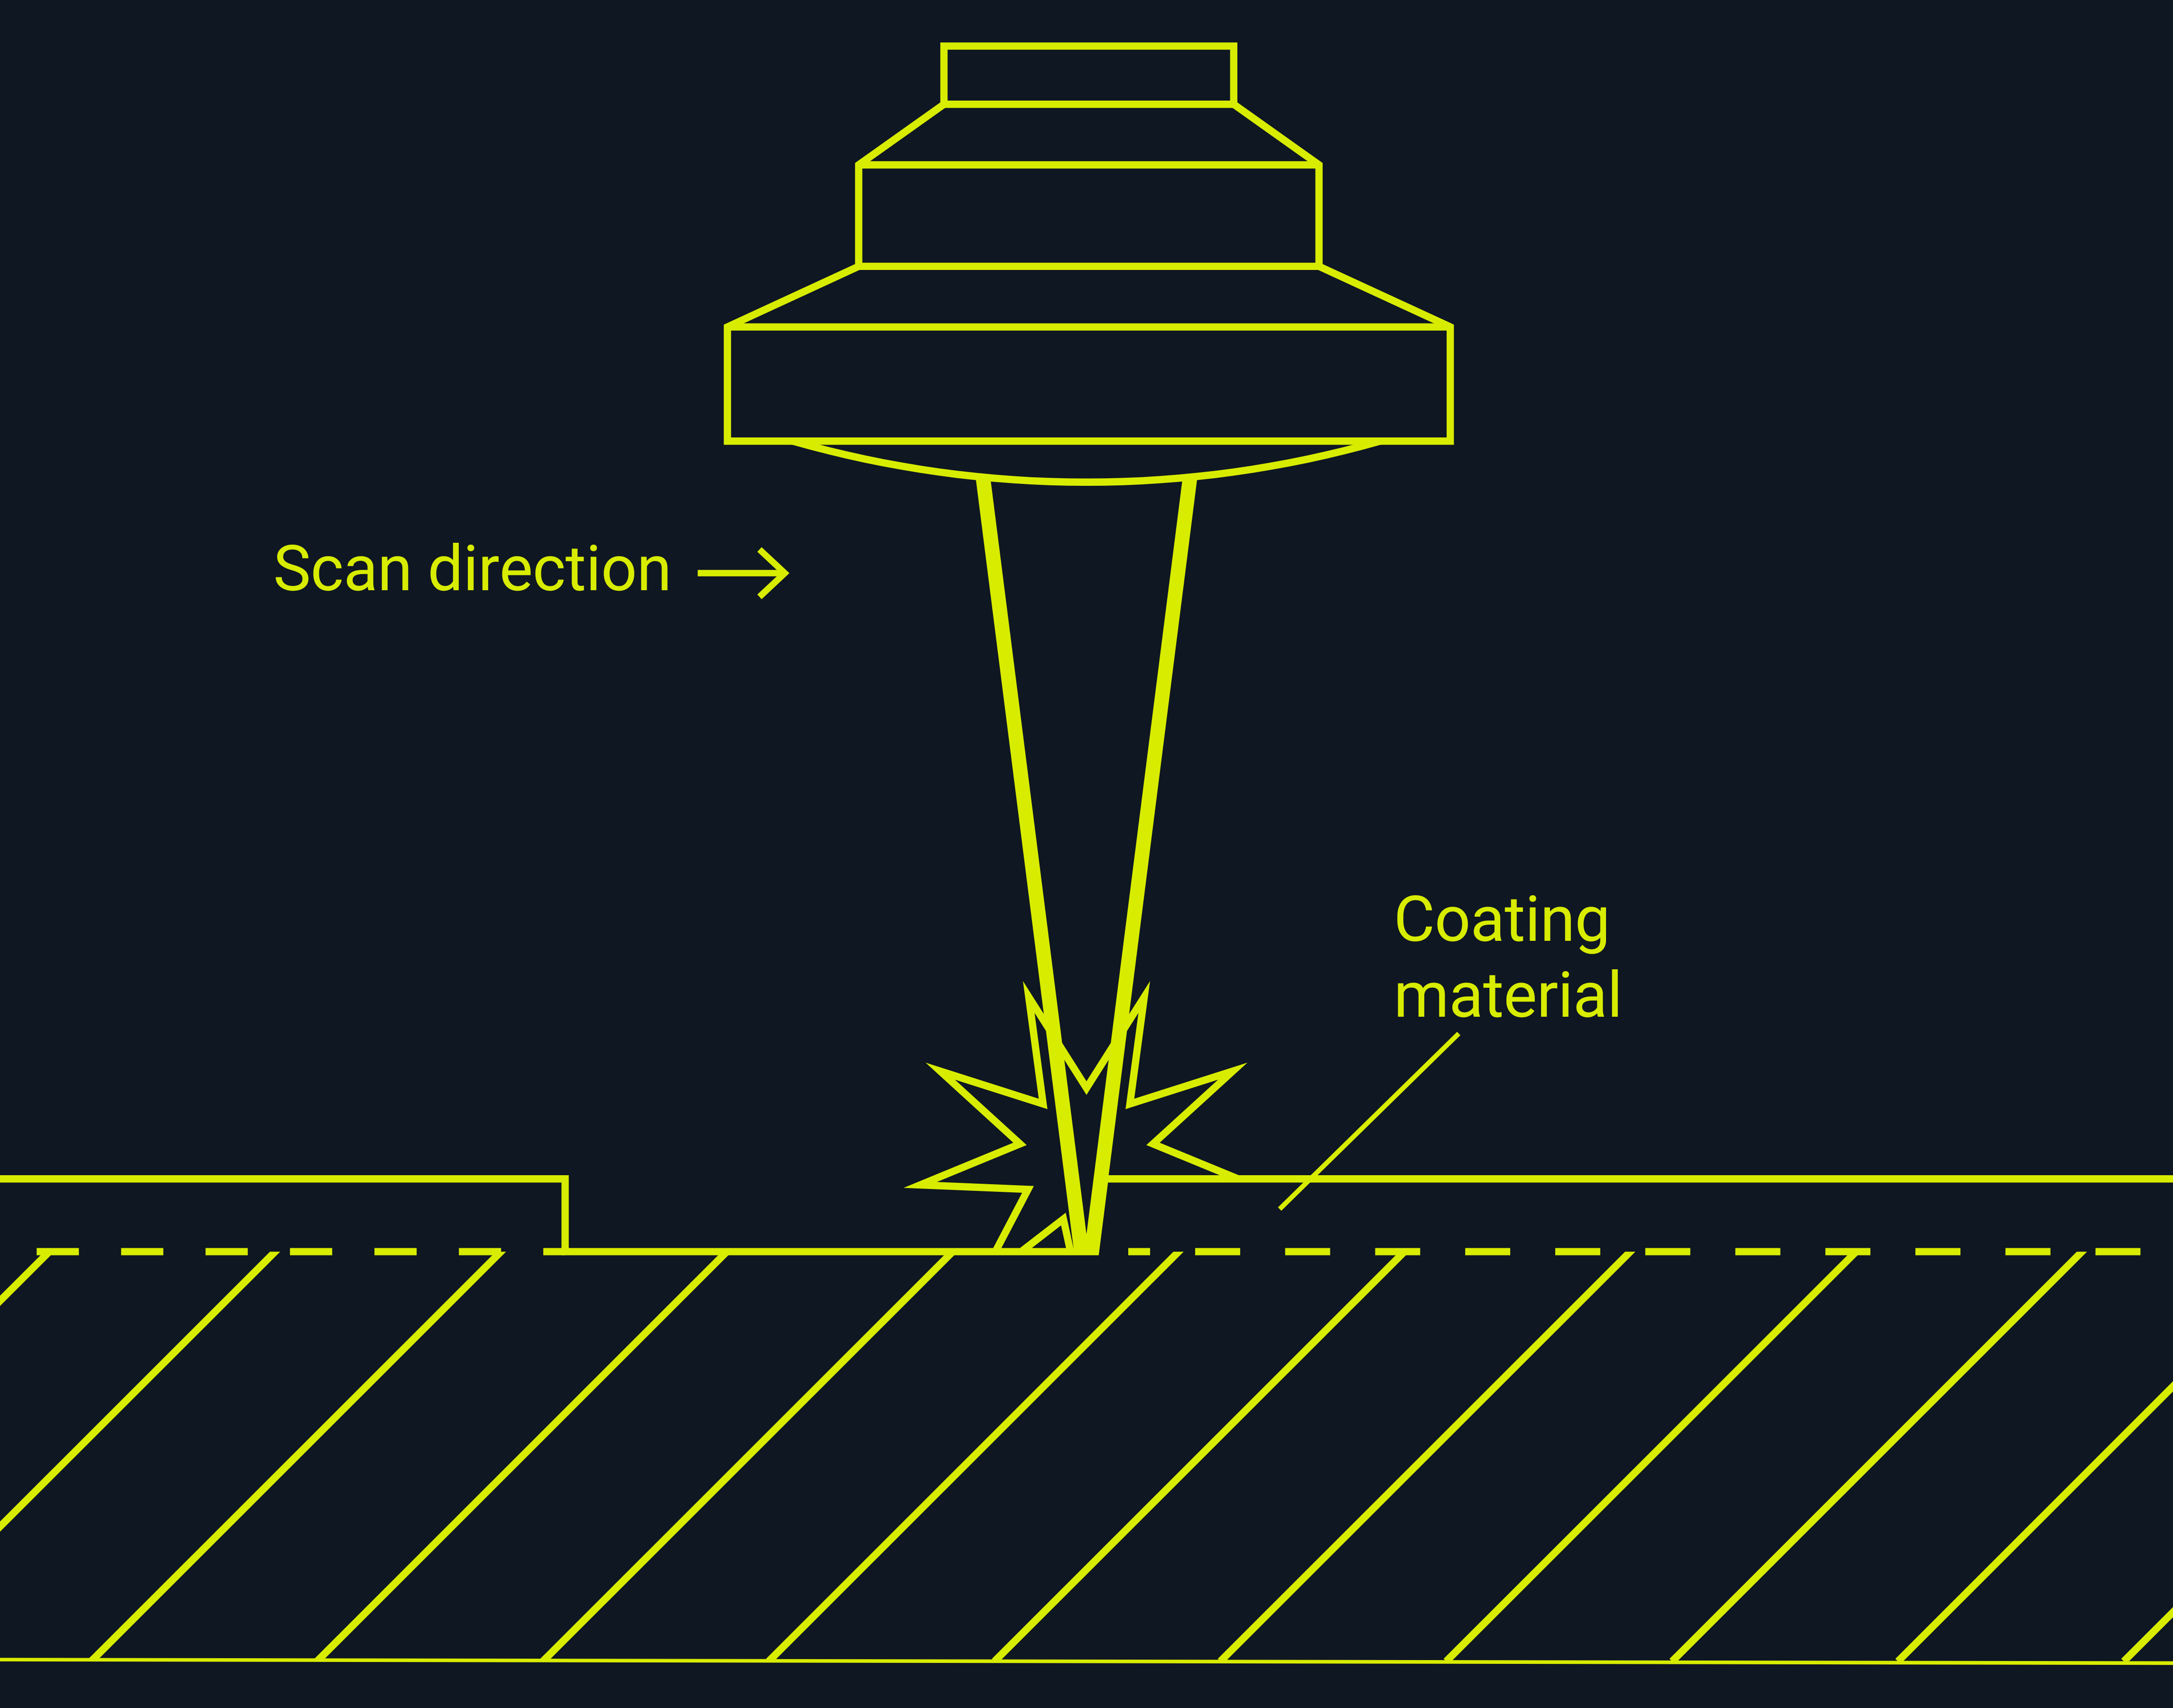 Figure that shows how the laser ablation process works